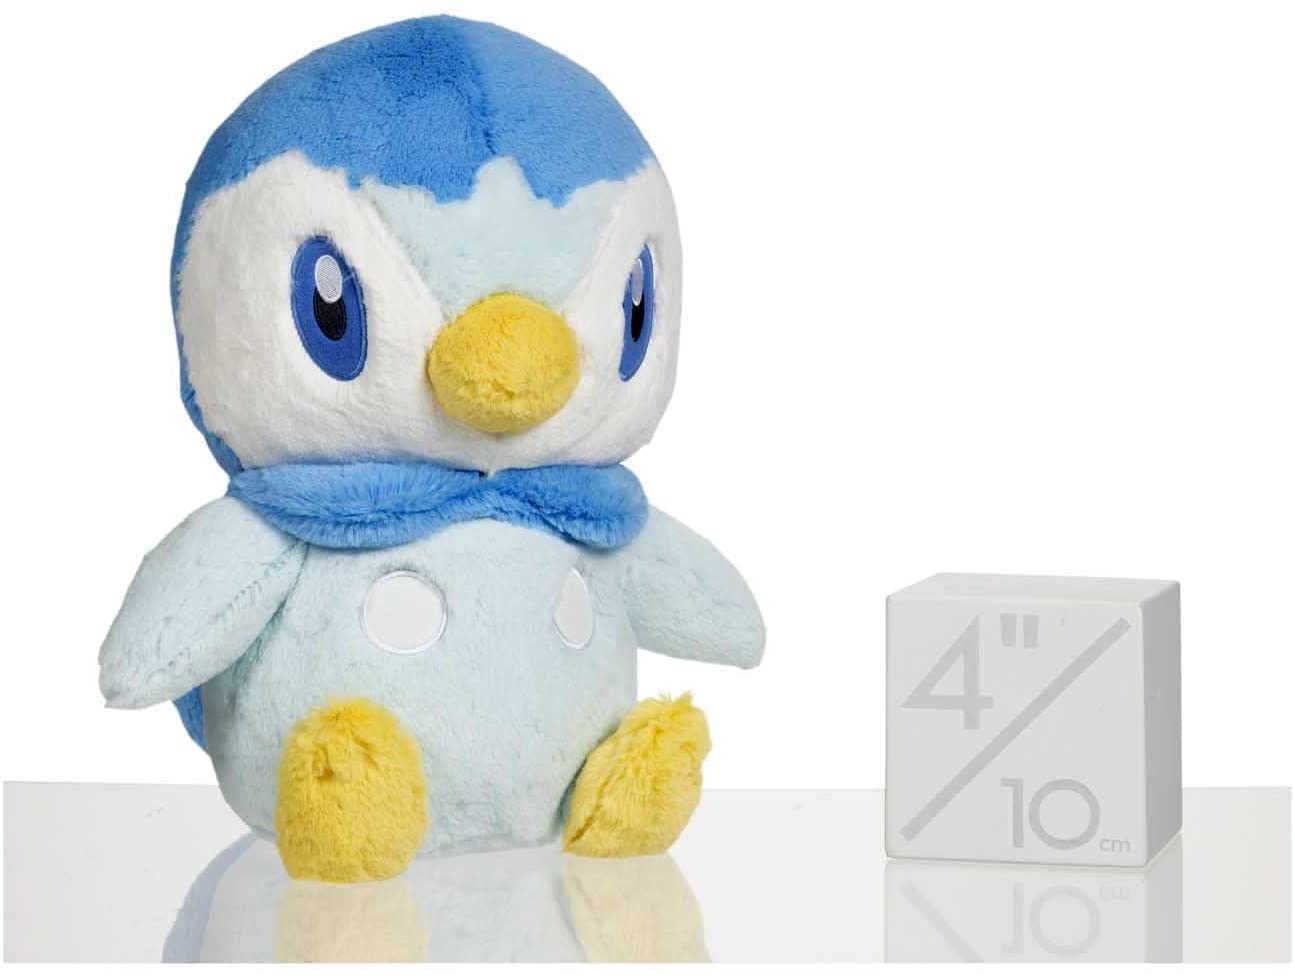 Pokemon 14 Inch Comfy Friends Plush - Piplup